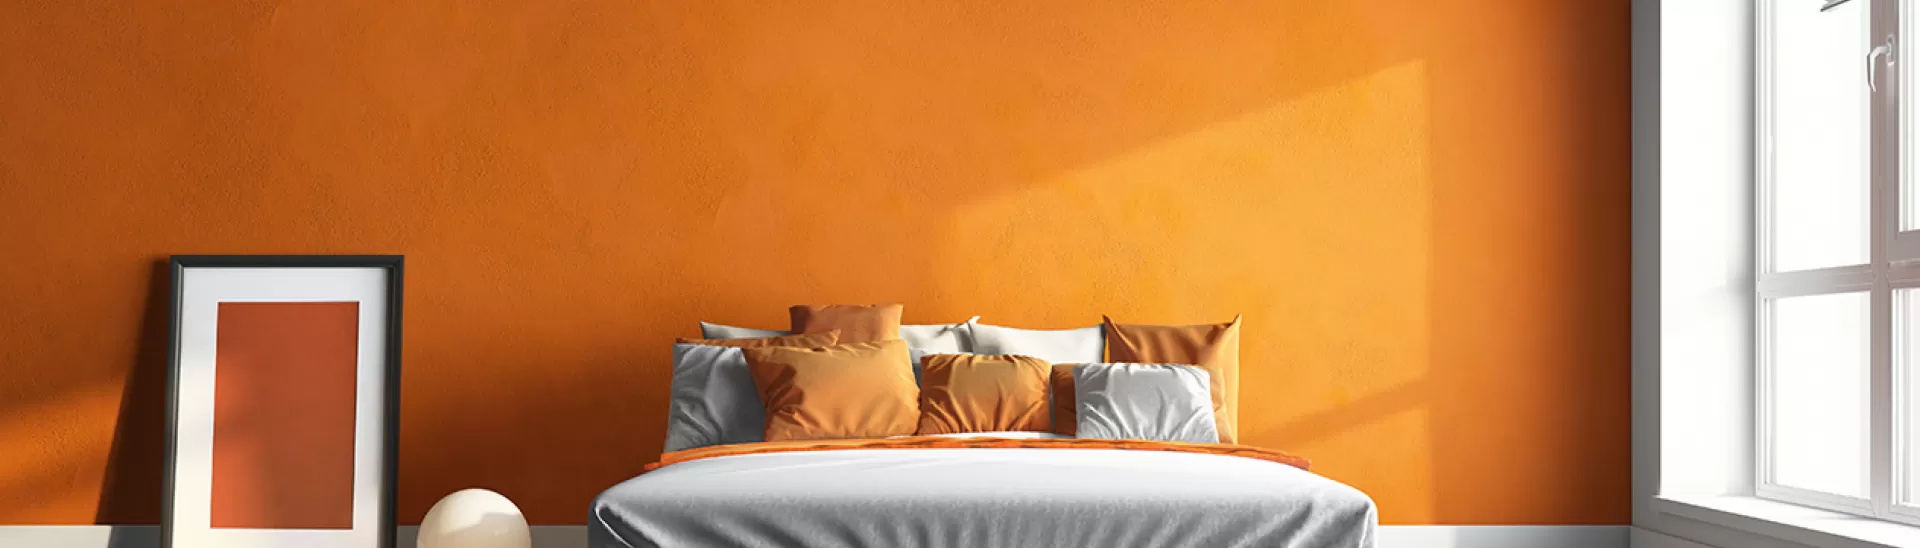 Orange Two Colour Combination for Bedroom Walls 